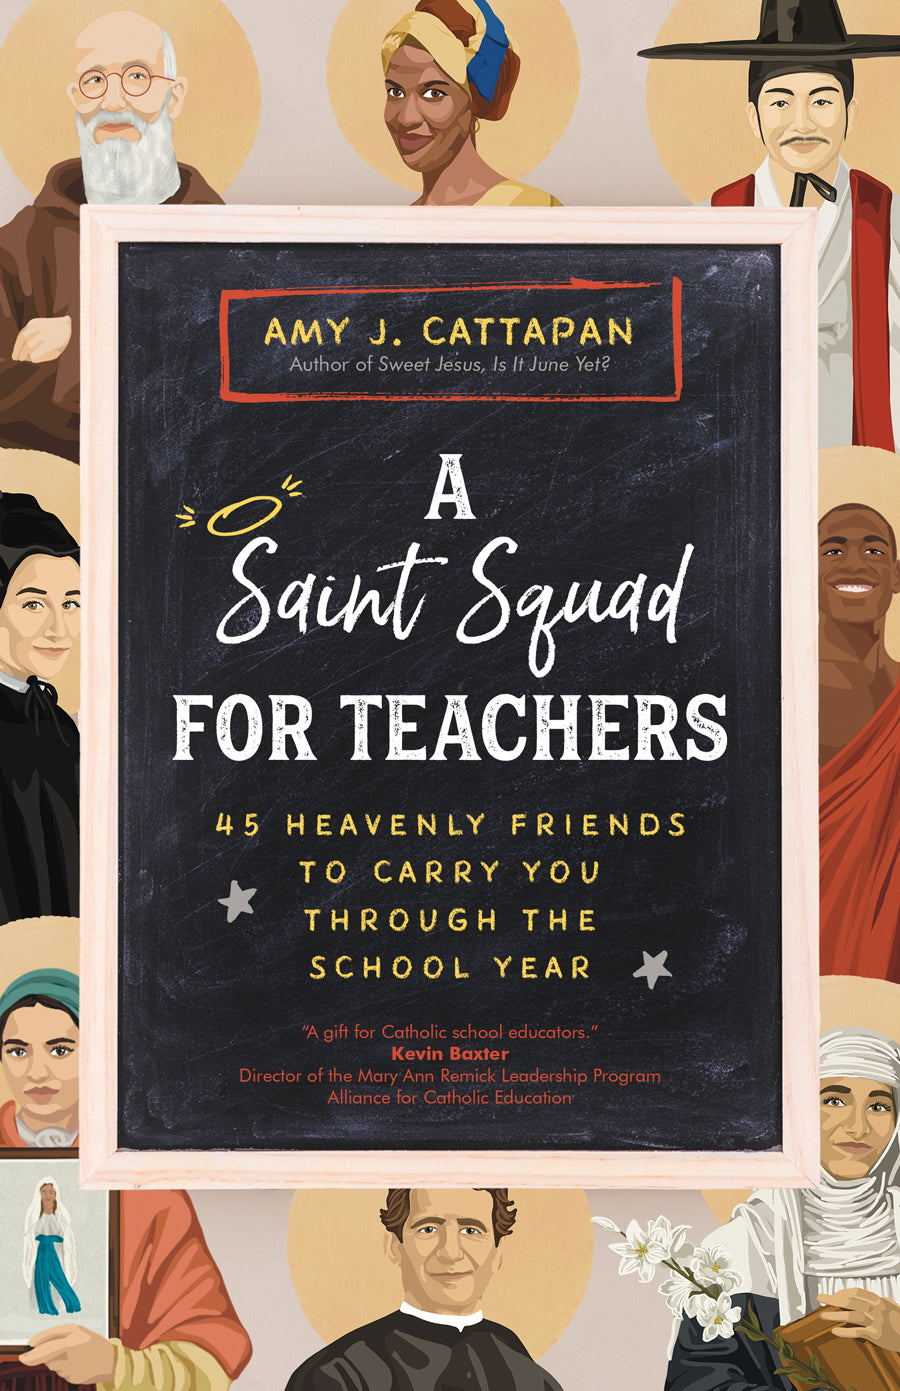 A Saint Squad for Teachers 45 Heavenly Friends to Carry You through the School Year